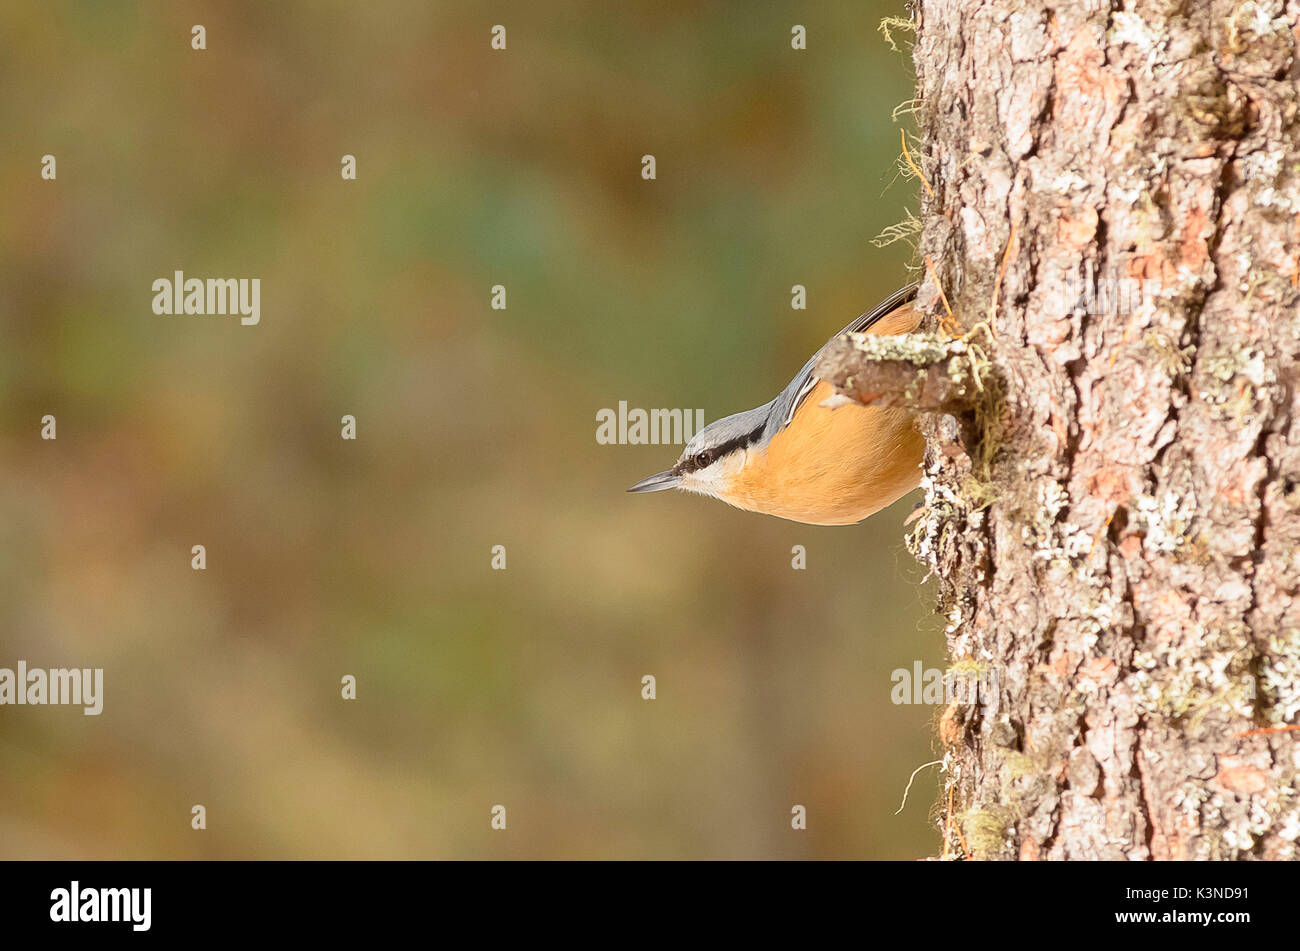 Val Roseg,Pontresina,Switzerland A woodpecker leaning against the trunk of a tree Stock Photo